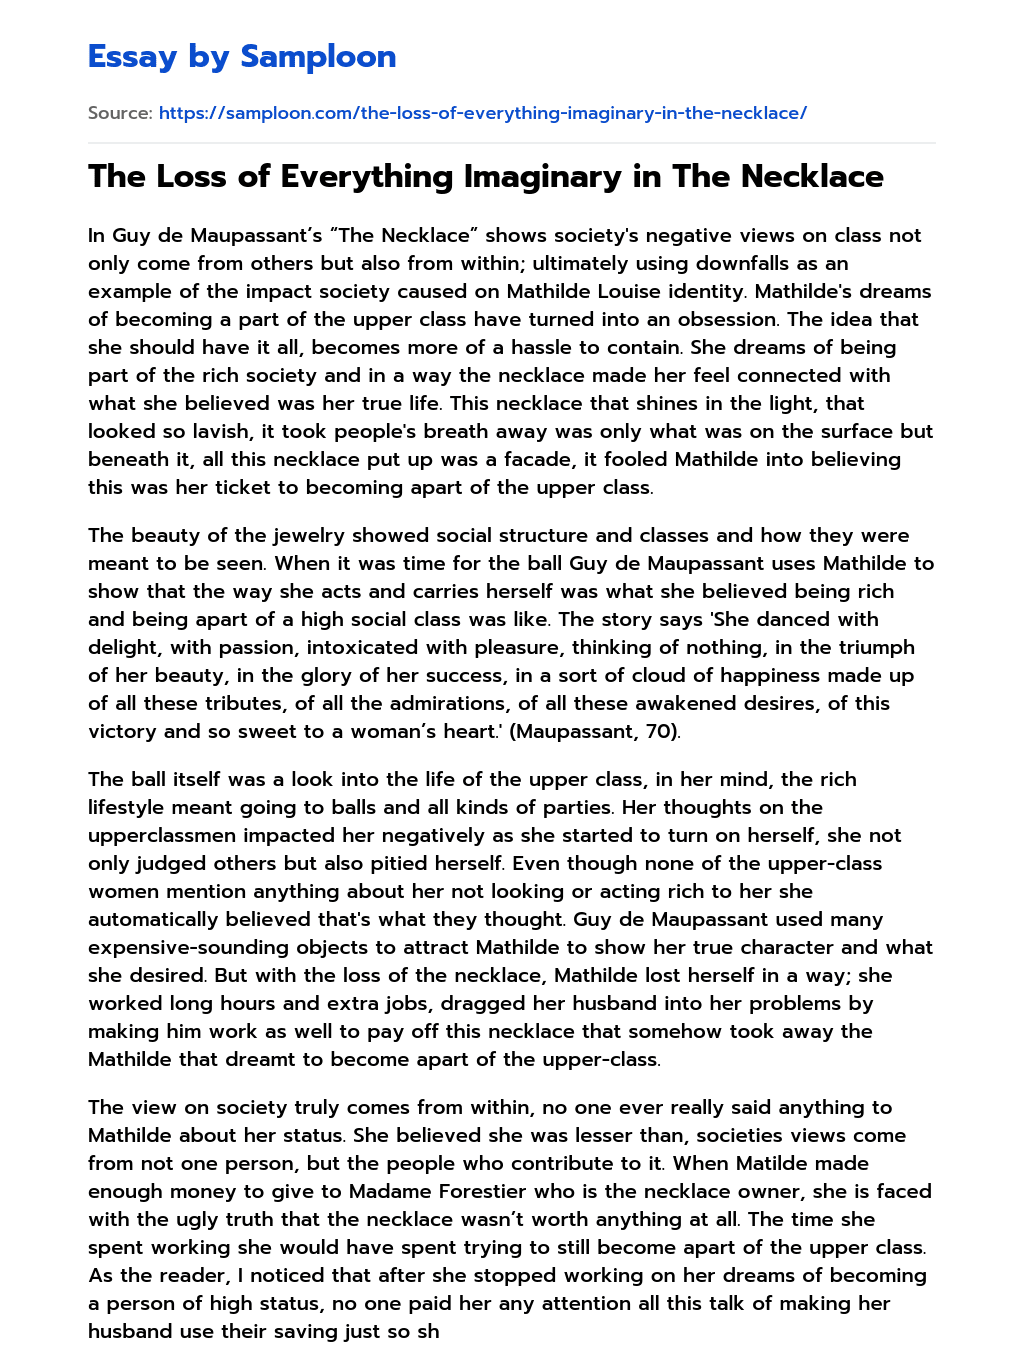 The Loss of Everything Imaginary in The Necklace essay